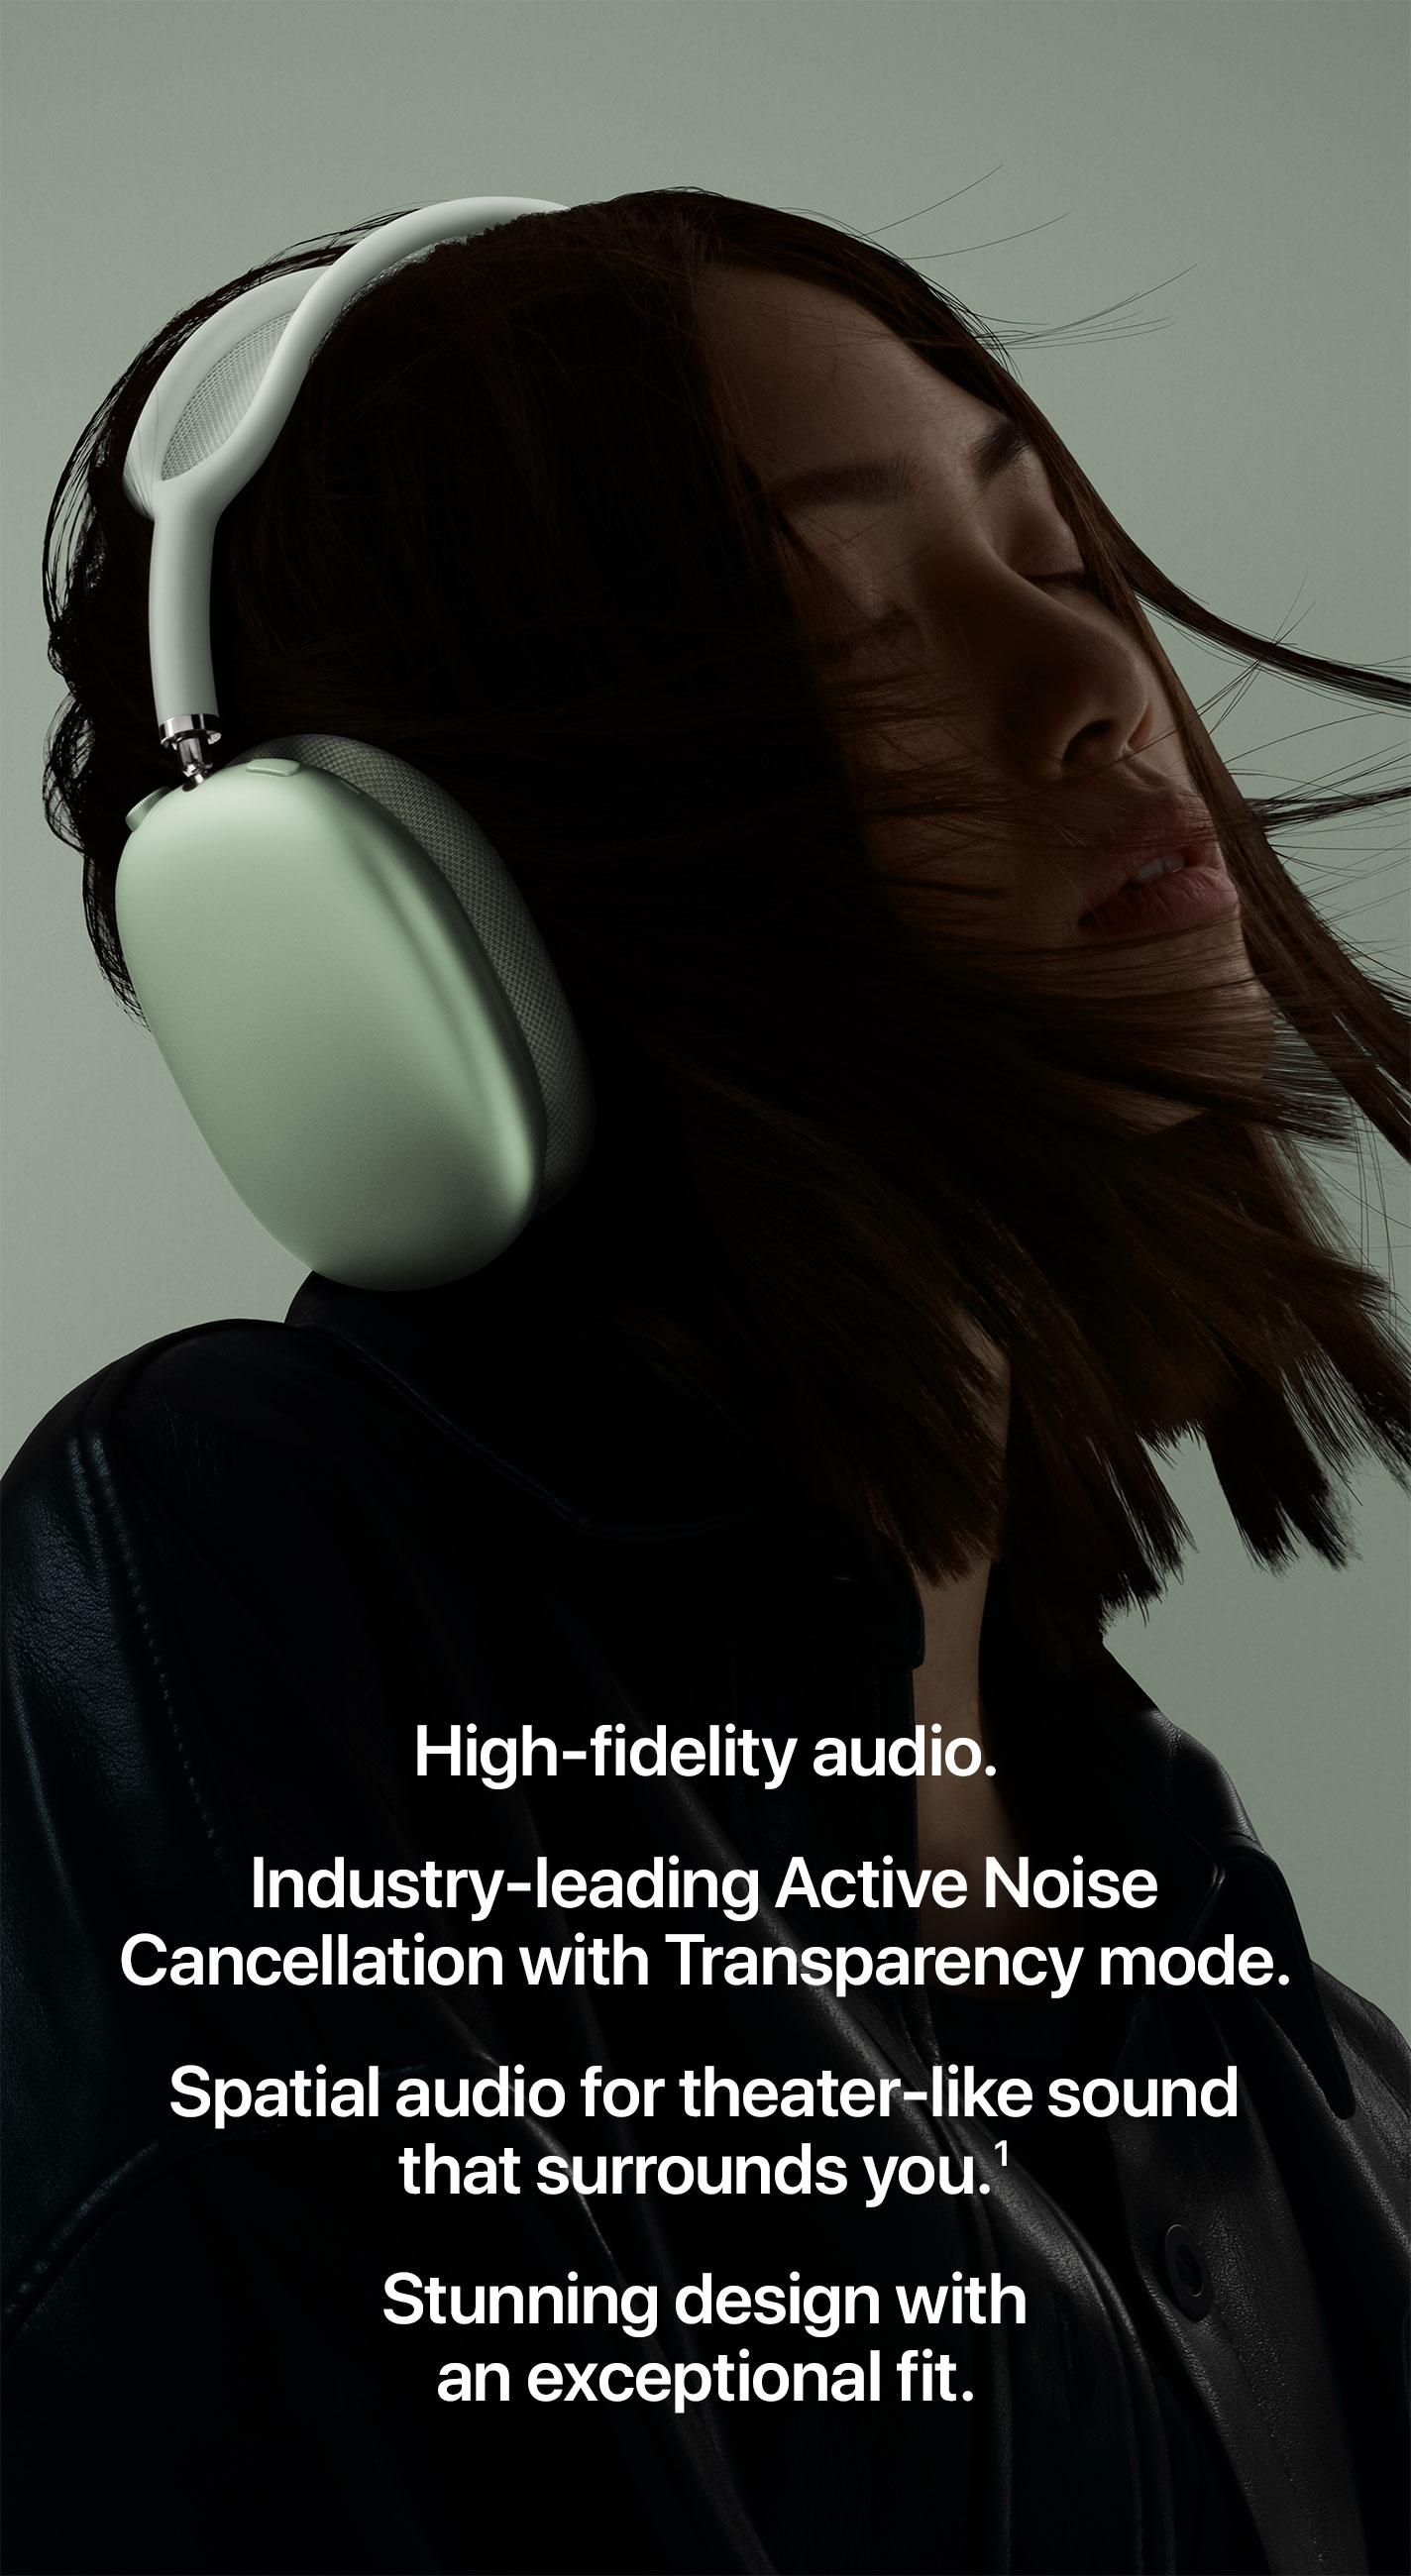 High-fidelity audio. Industry-leading Active Noise Cancellation with Transparency mode. Spatial audio for theater-like sound that surrounds you.(1) Stunning design with an exceptional fit.